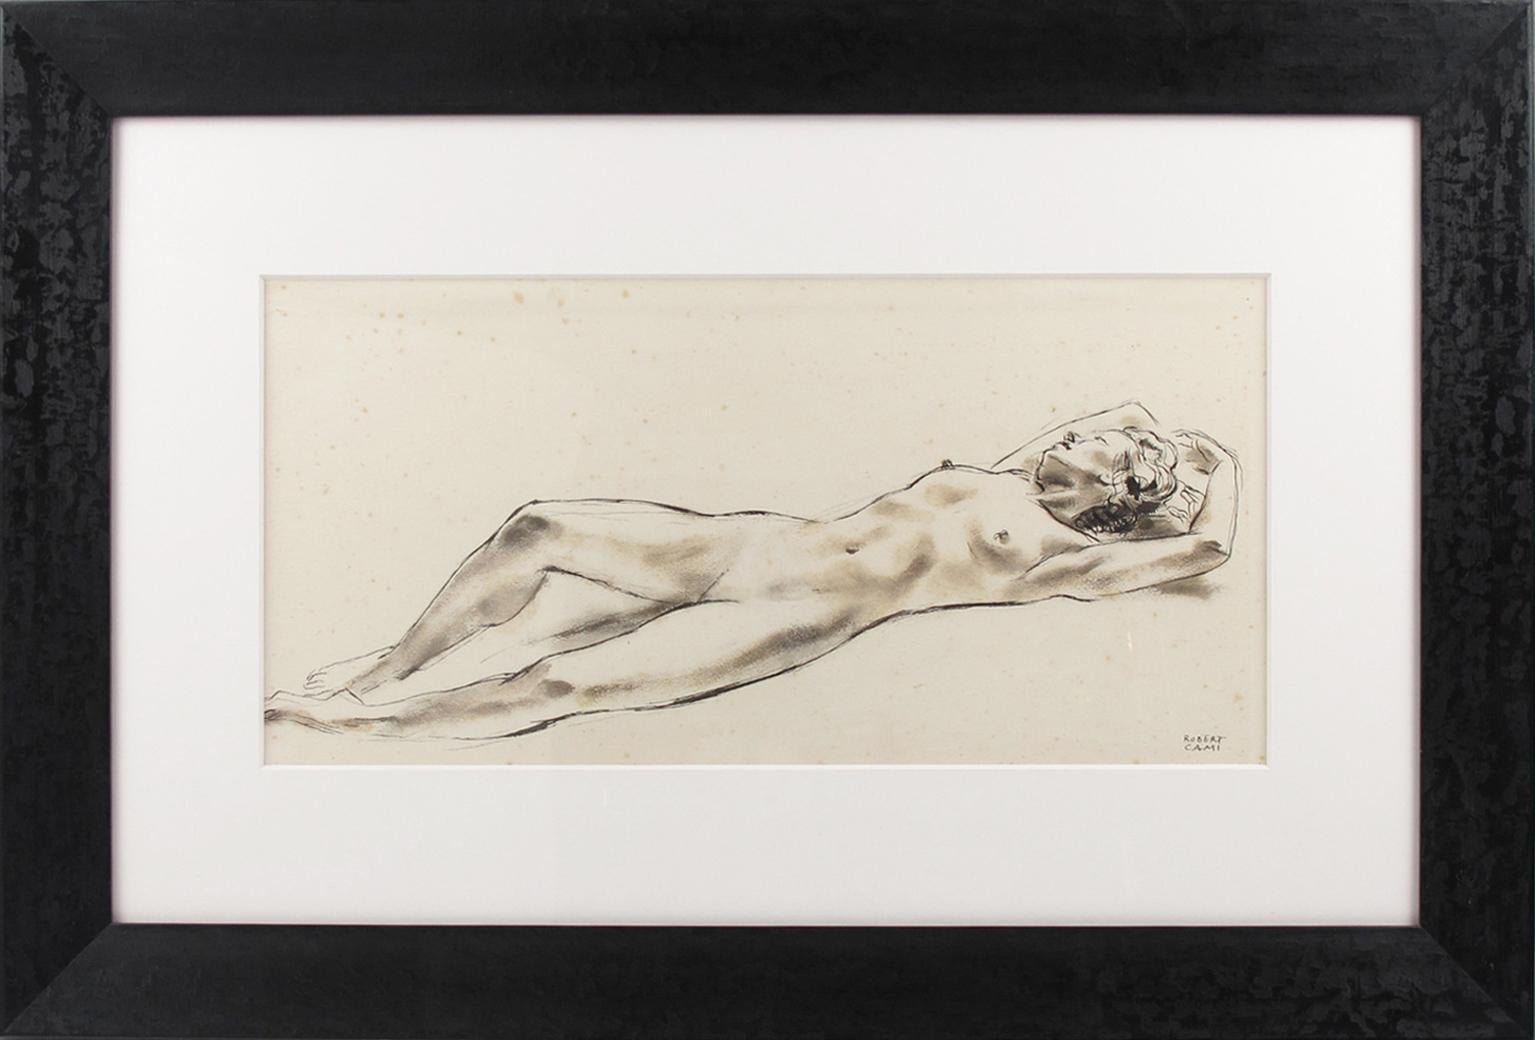 Interesting ink-wash nude woman study by French painter Robert Cami (1900-1975). In between drawing and painting, the Lavis process consists of the use of a pigment diluted in the water, especially the ink, then applied with a brush.
The work